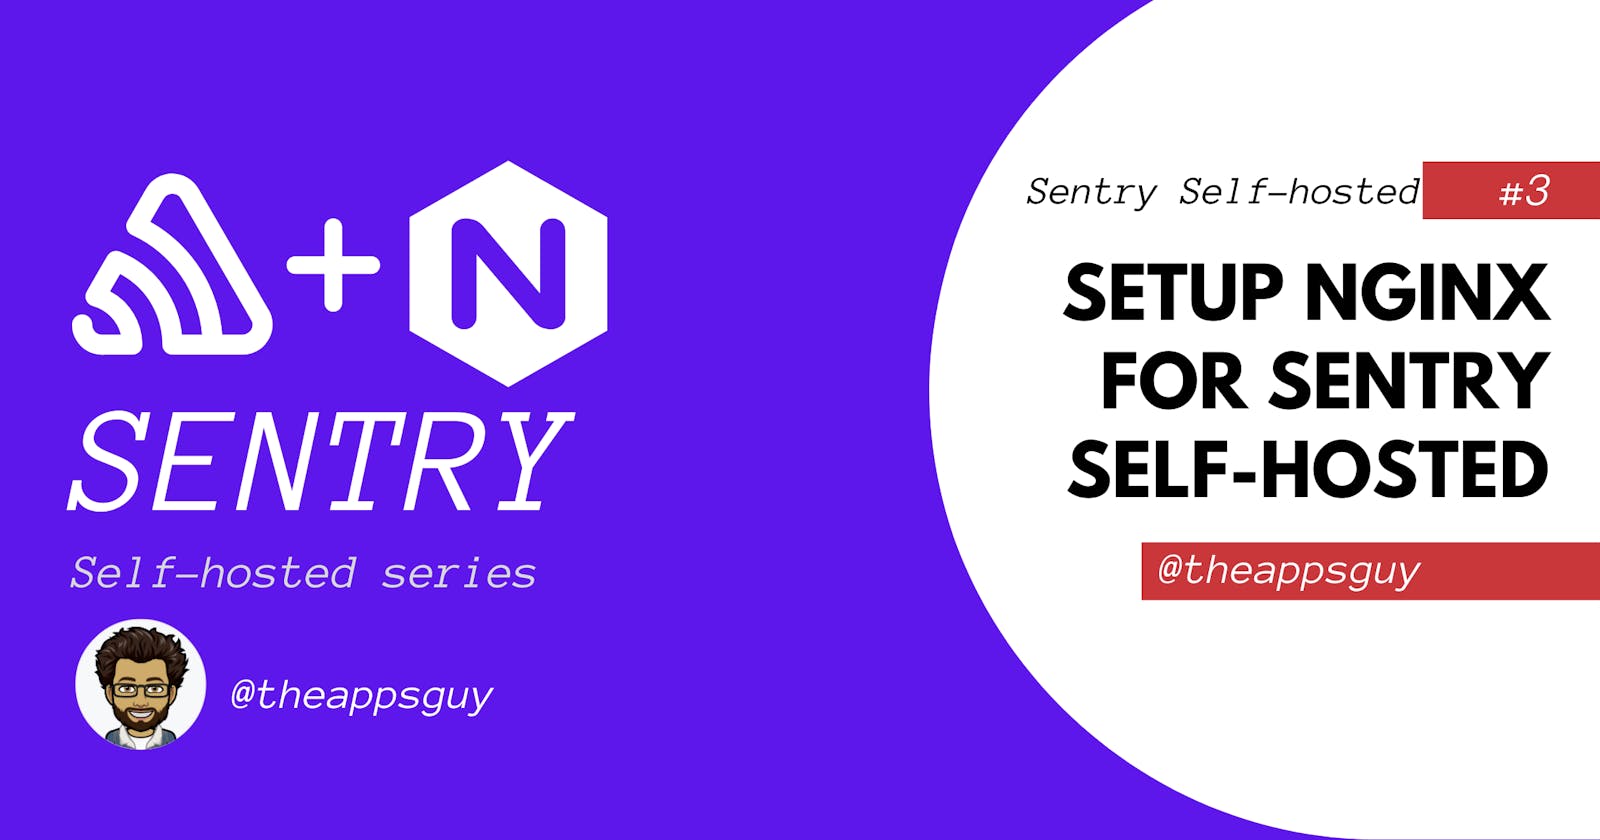 Configuring NGINX configuration for Sentry self-hosted